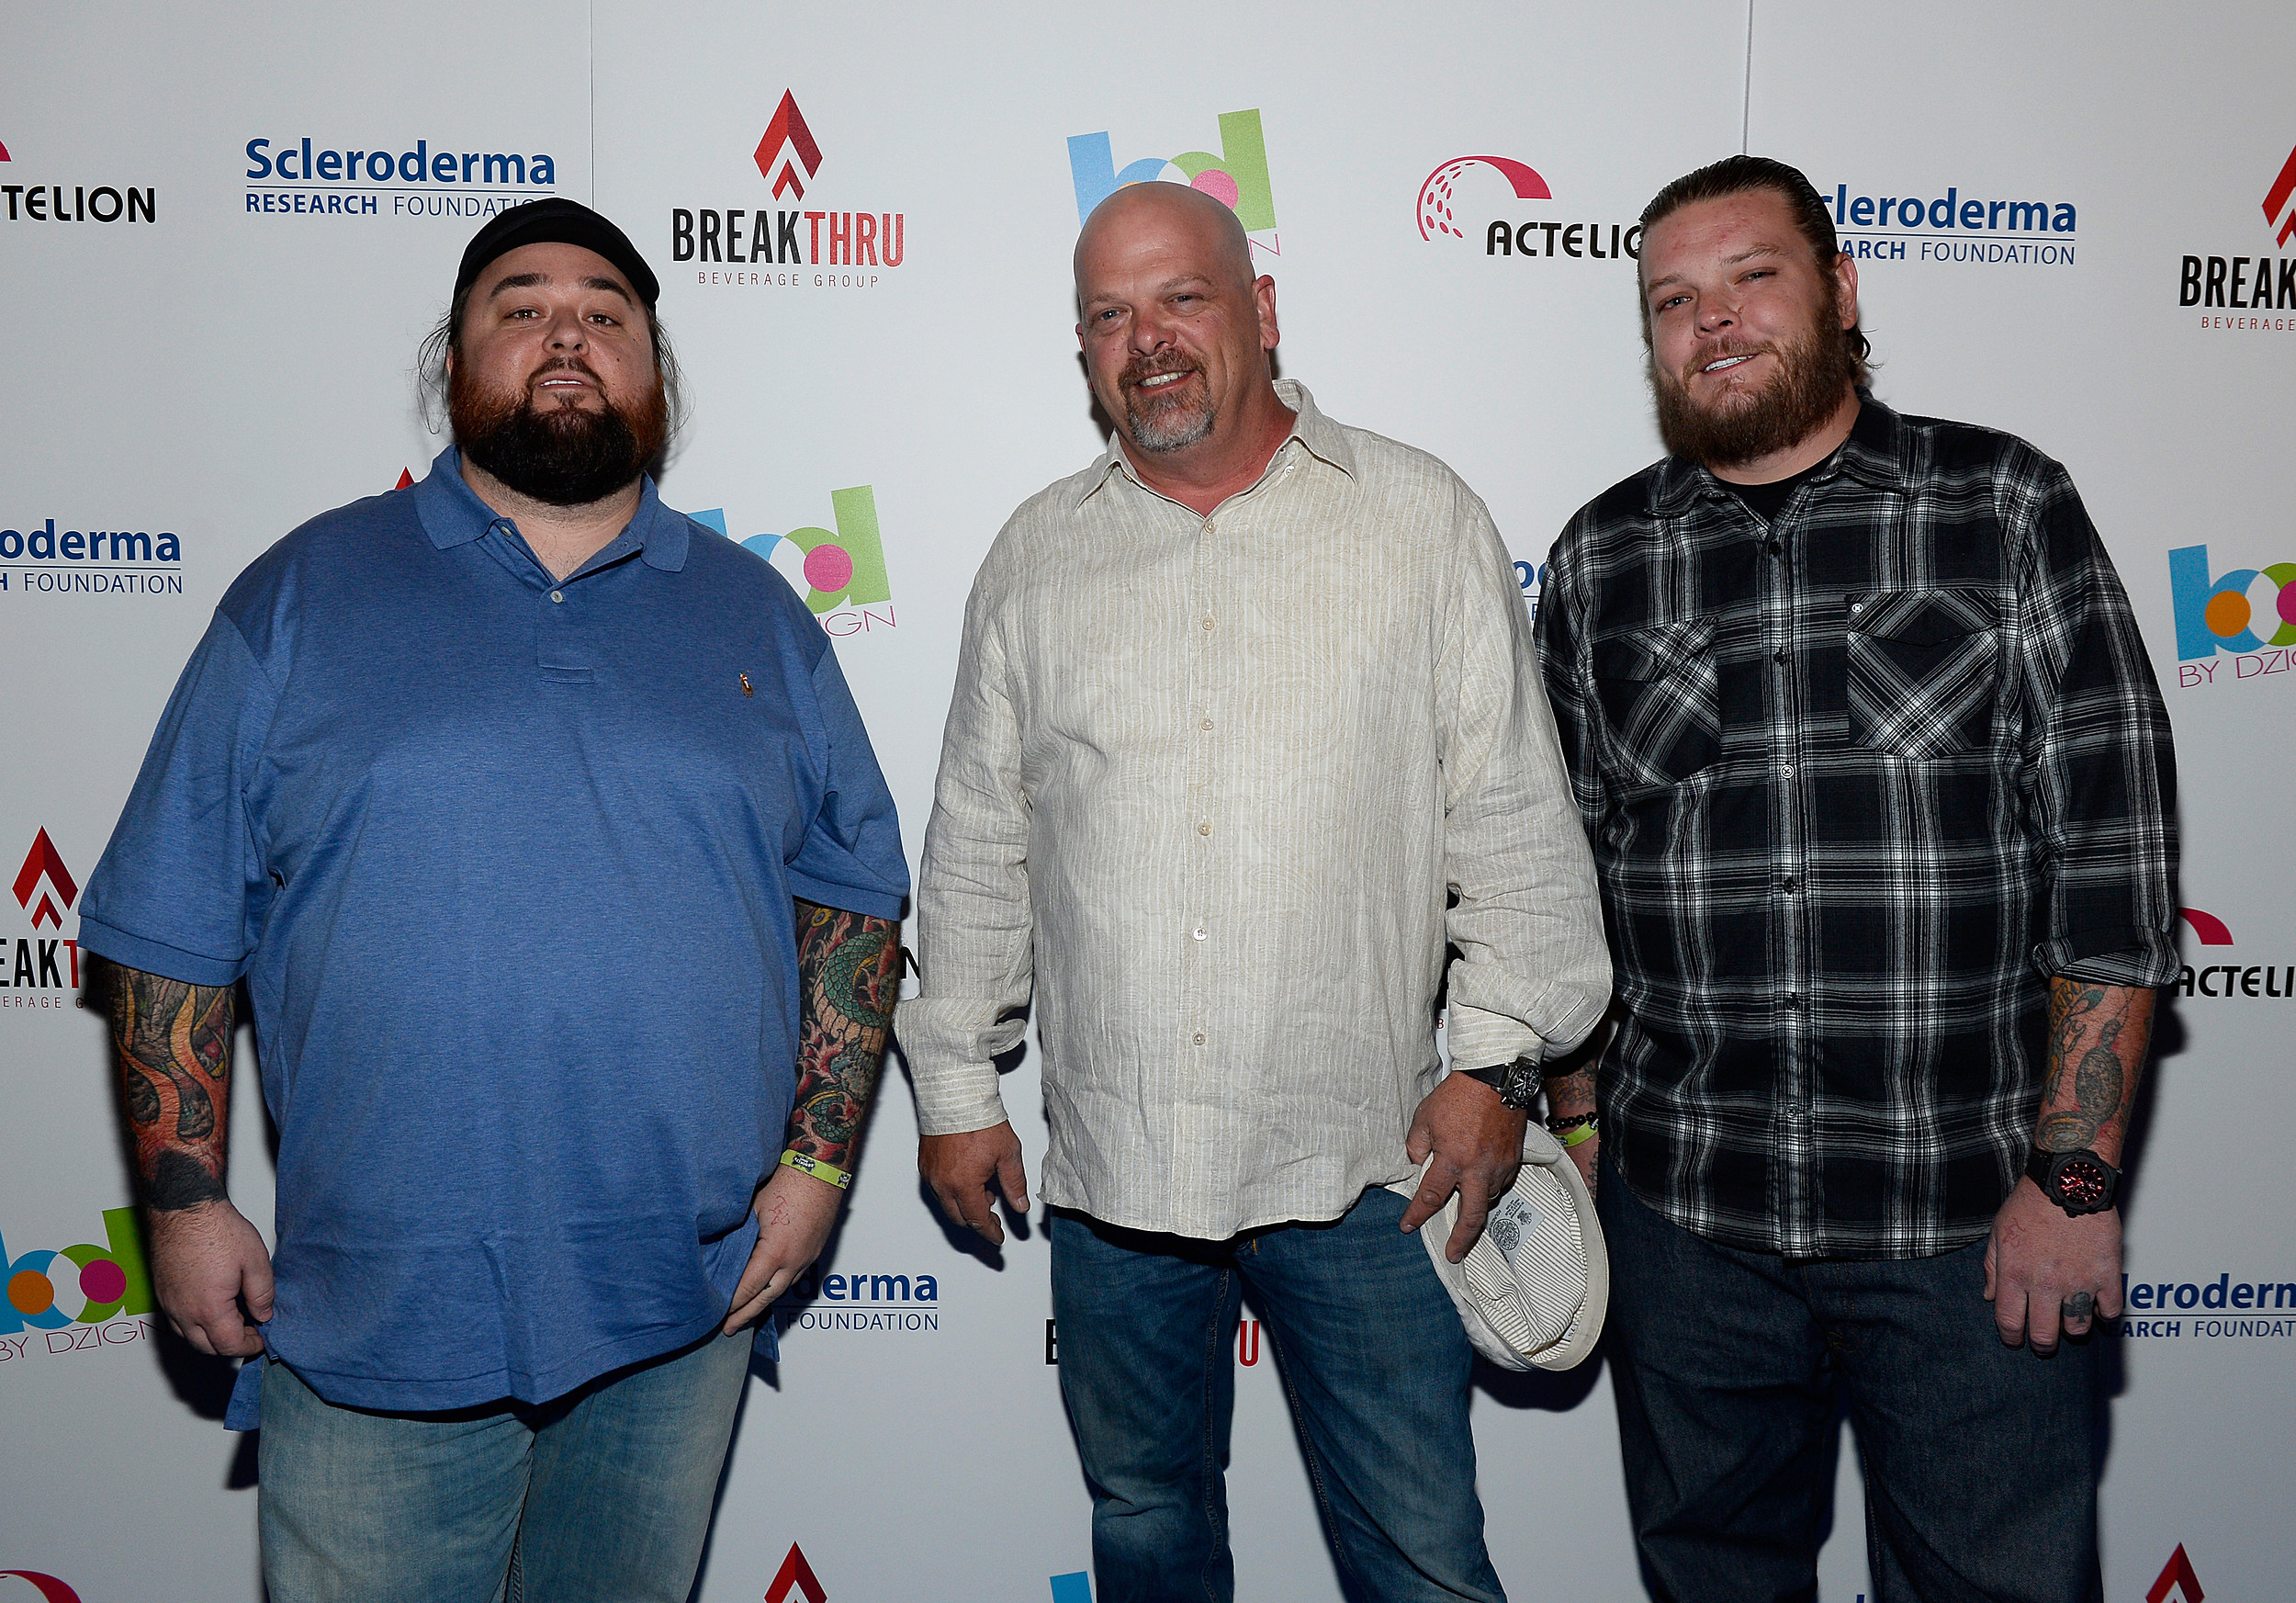 Pawn Stars' spinoff to premiere on History Nov. 9 